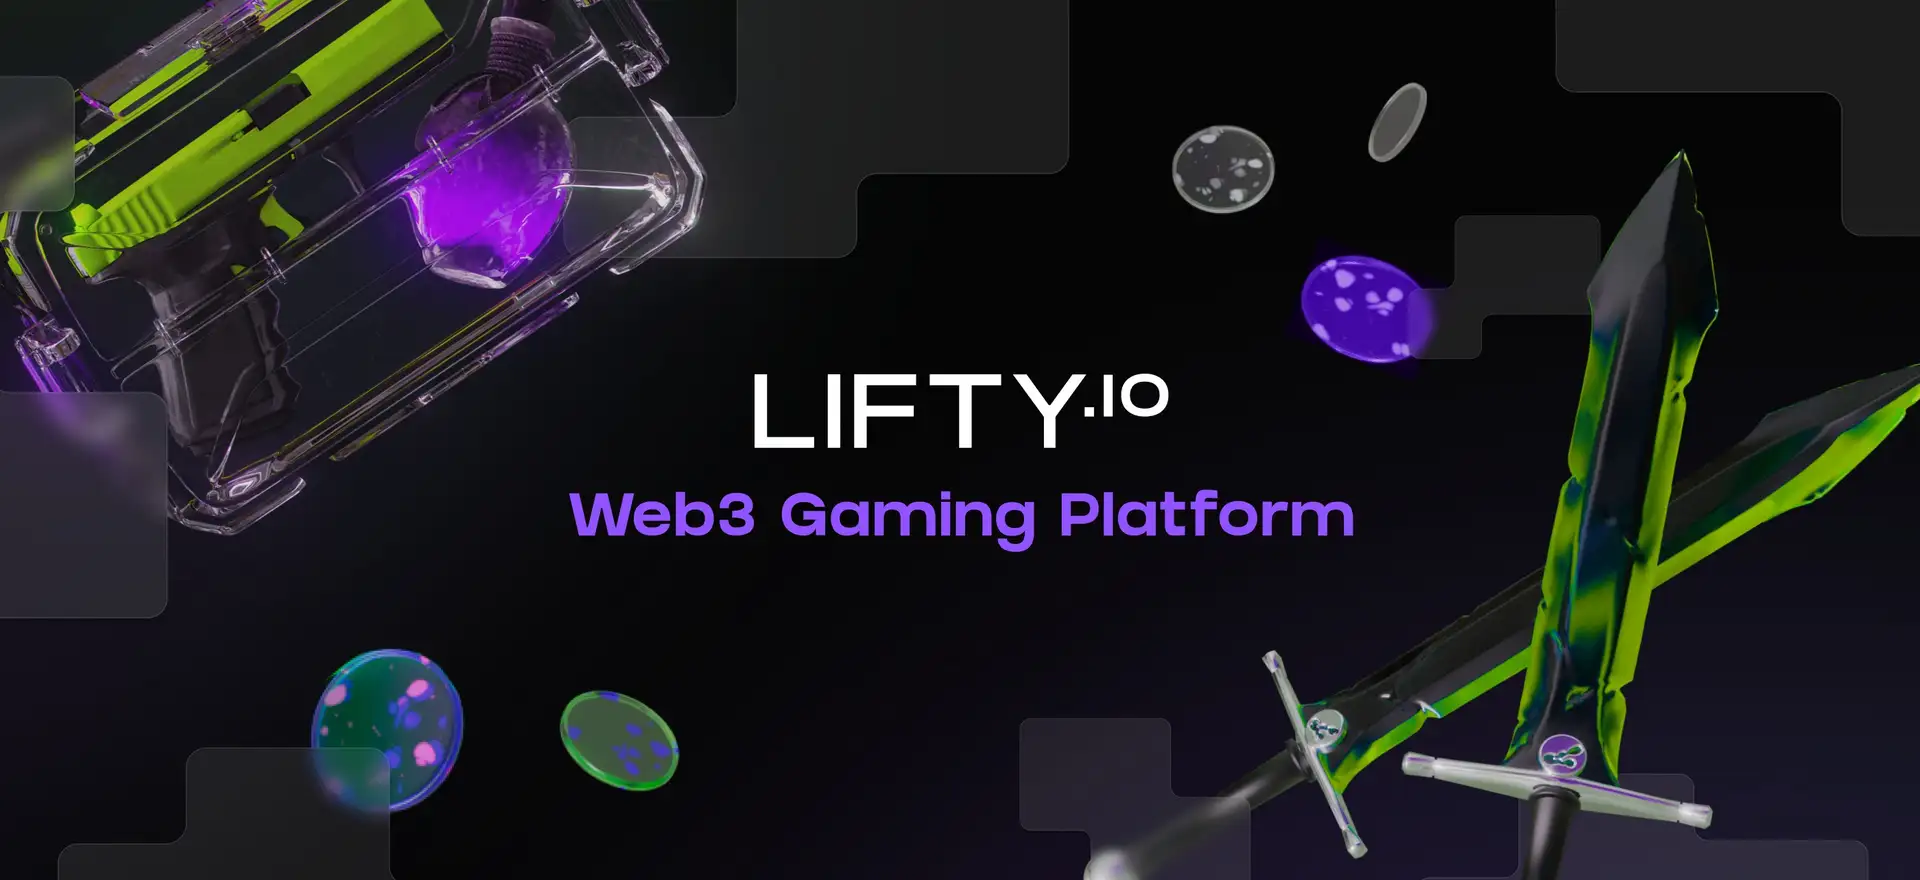 Lifty.io Game Review Score 4.5/5.0 on Magic Store 🚀